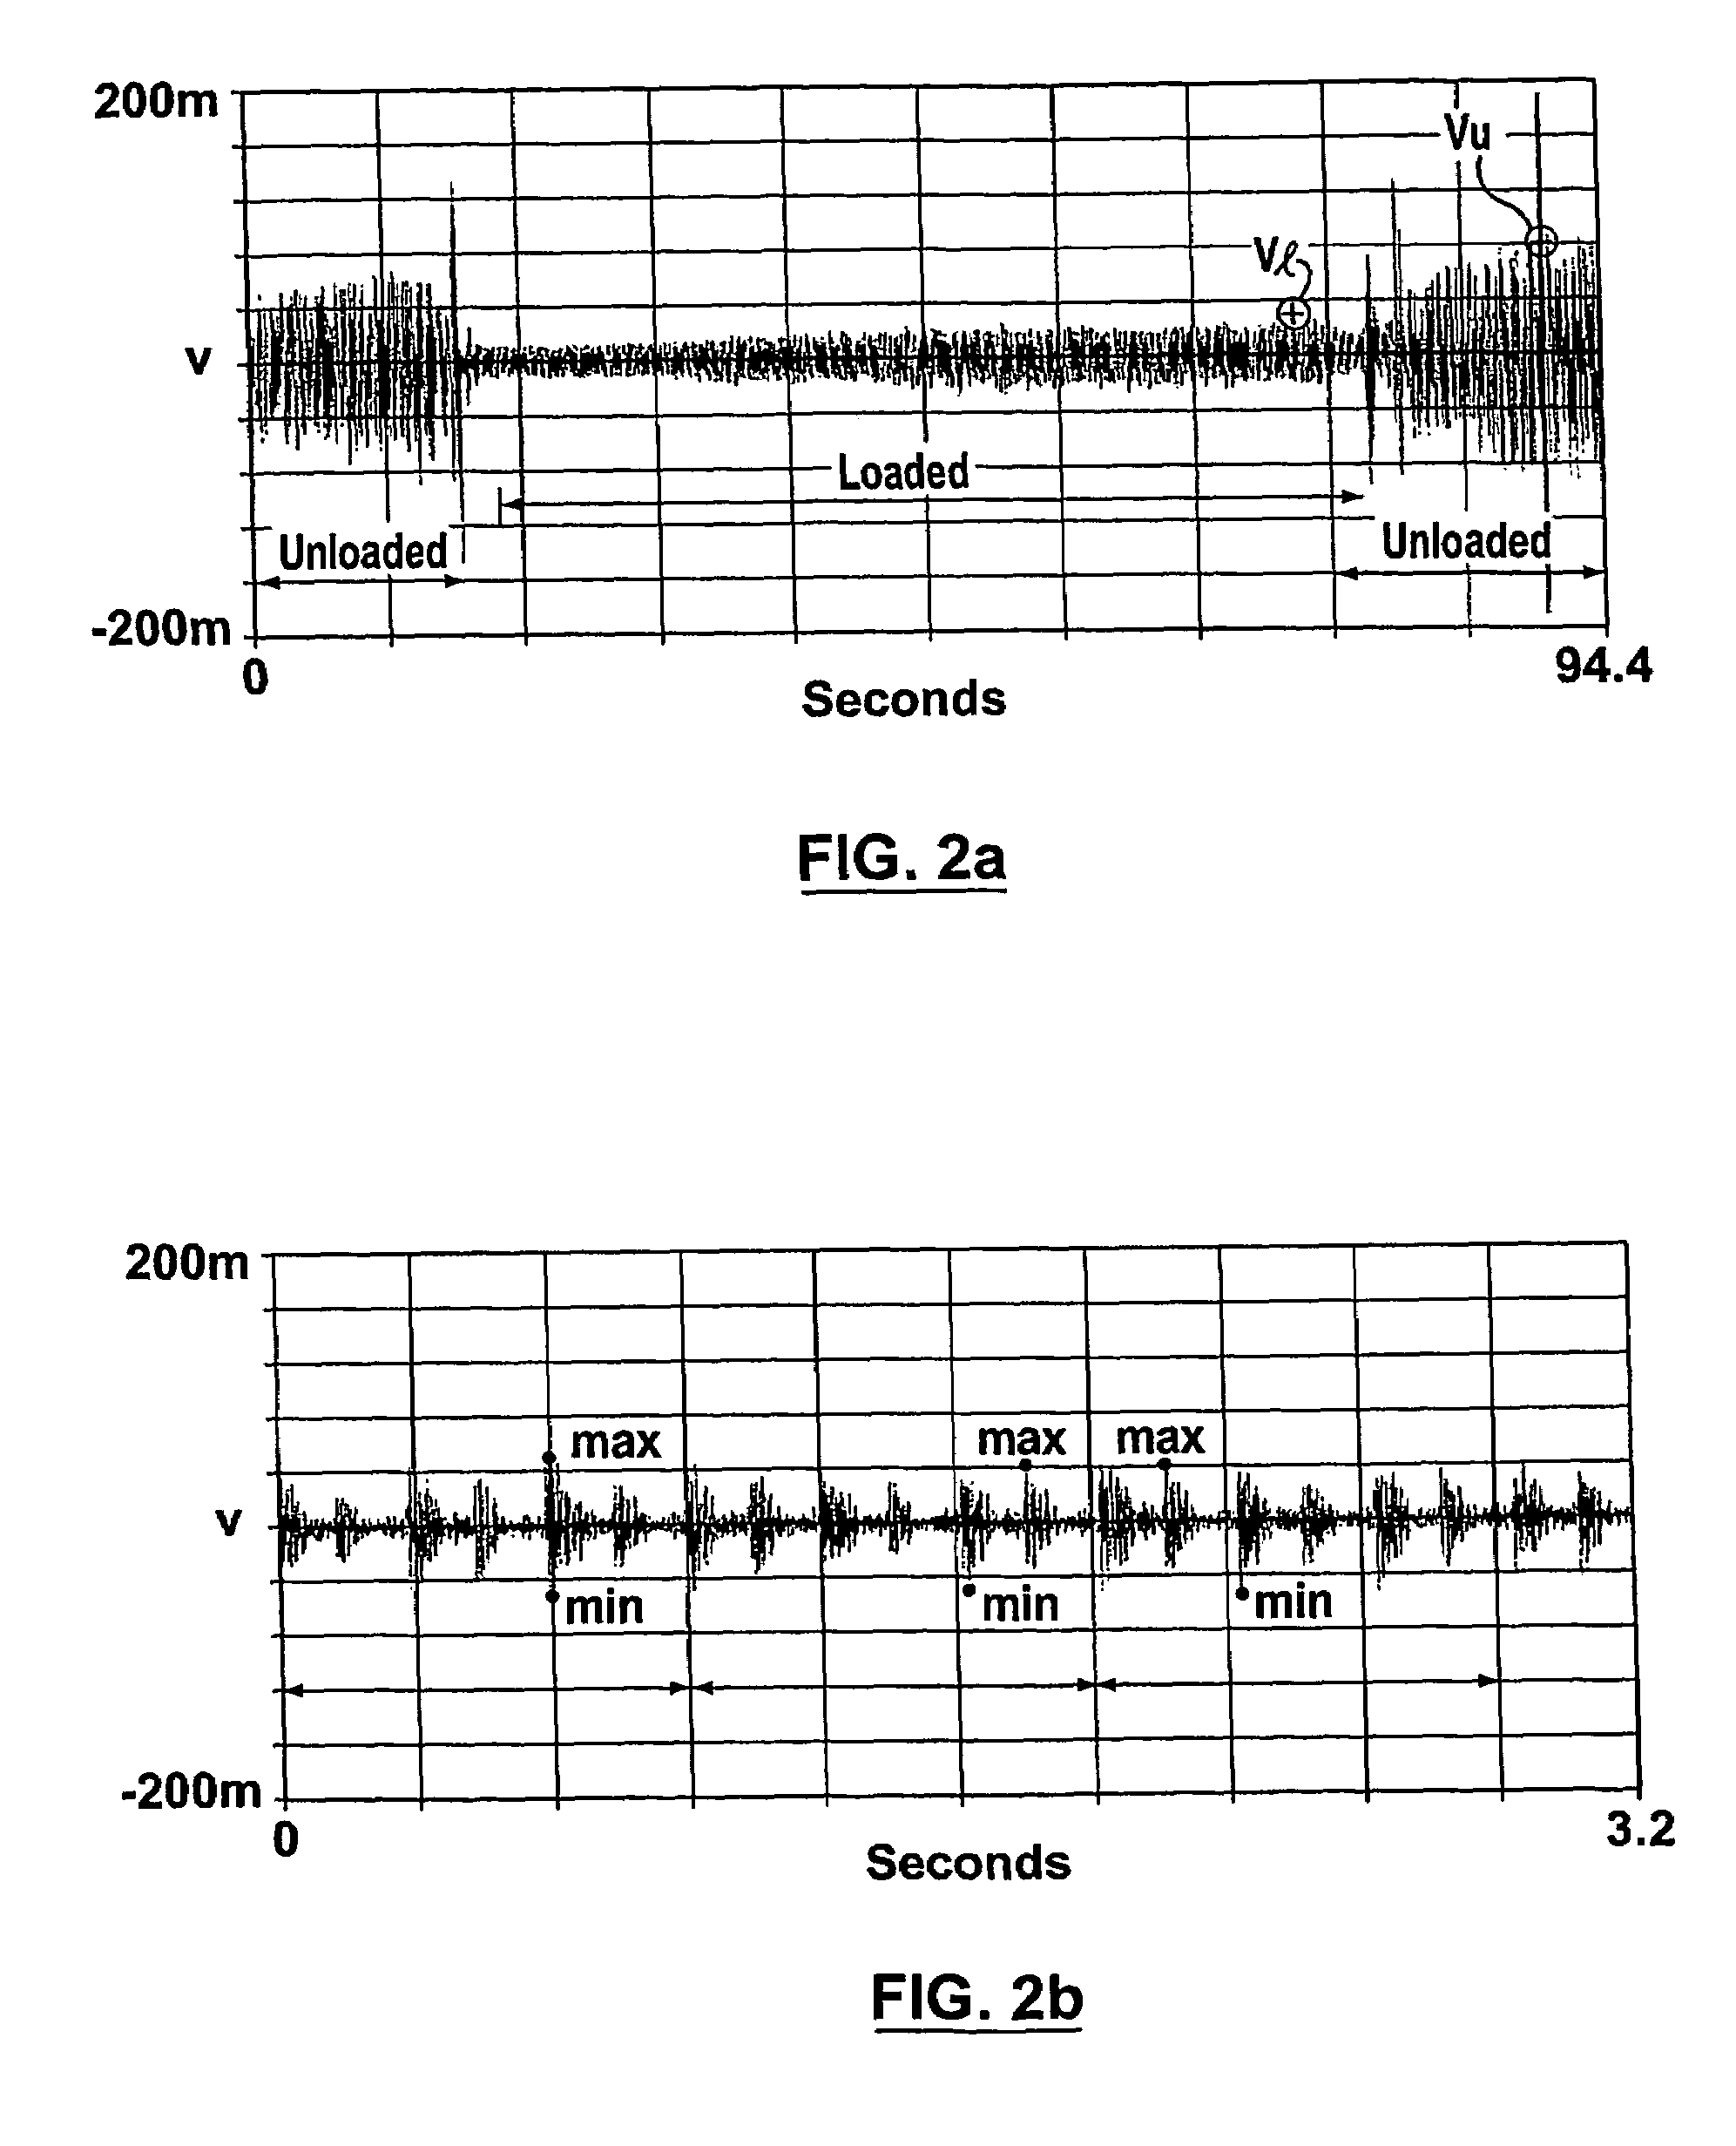 Diagnostic method for predicting maintenance requirements in rotating equipment